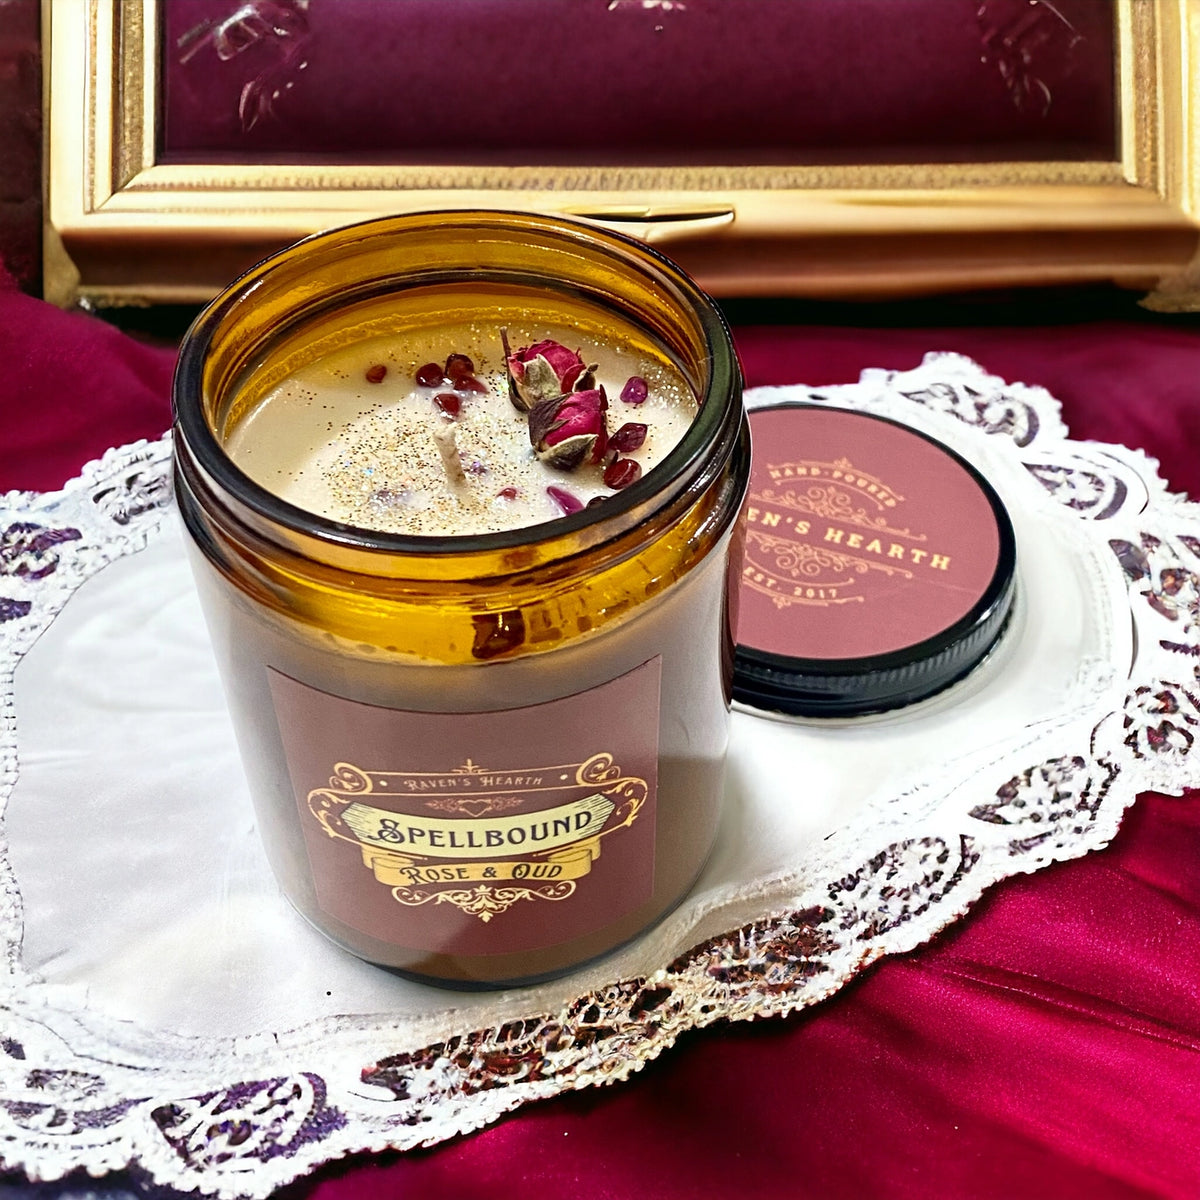 Spellbound Soy Candle | Rose and Oud Scent Soy Candle